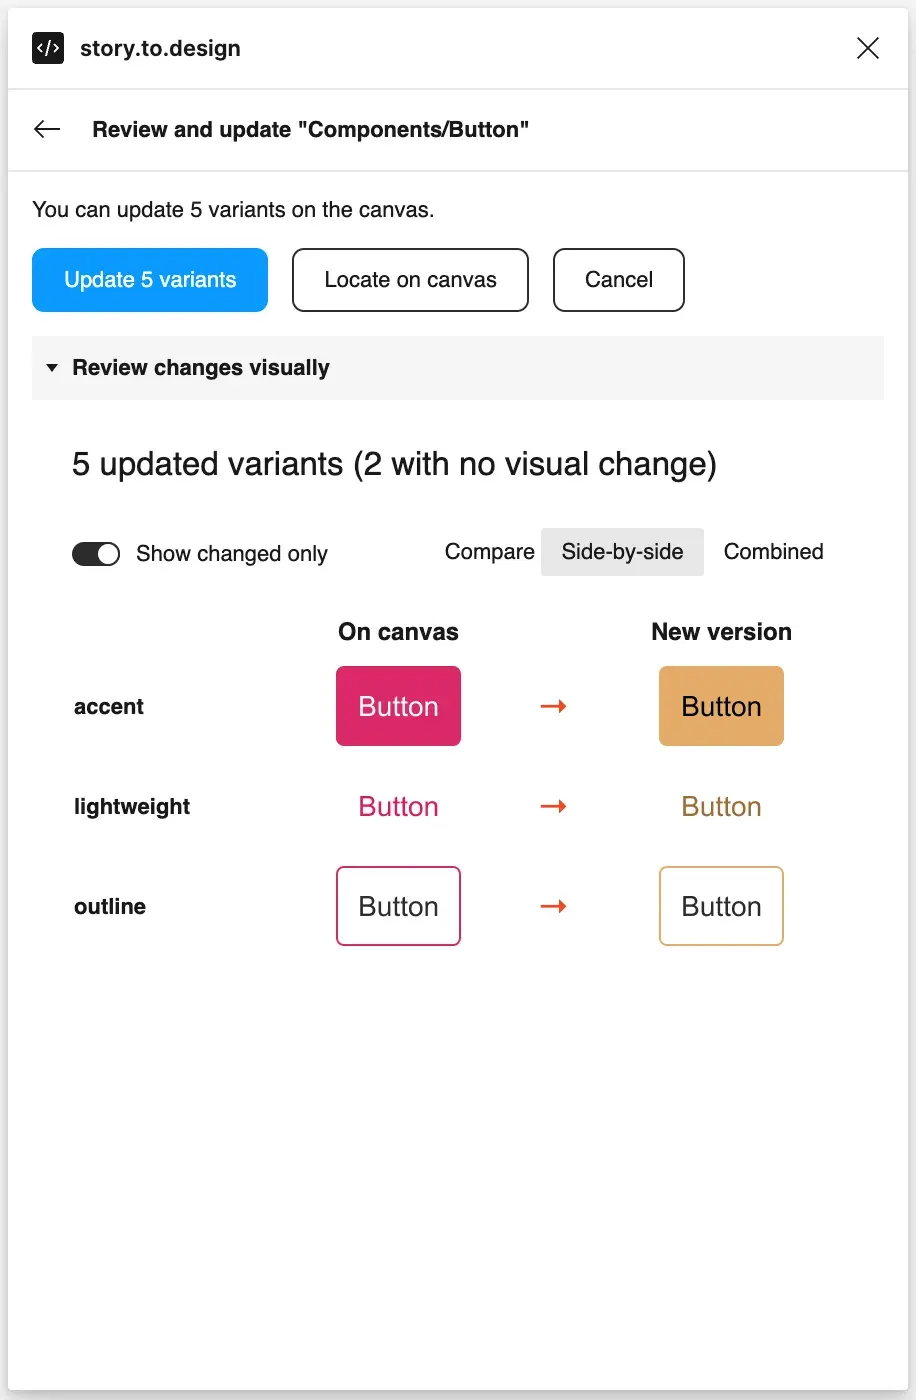 Screenshot of visual updates feature in the story.to.design plugin.